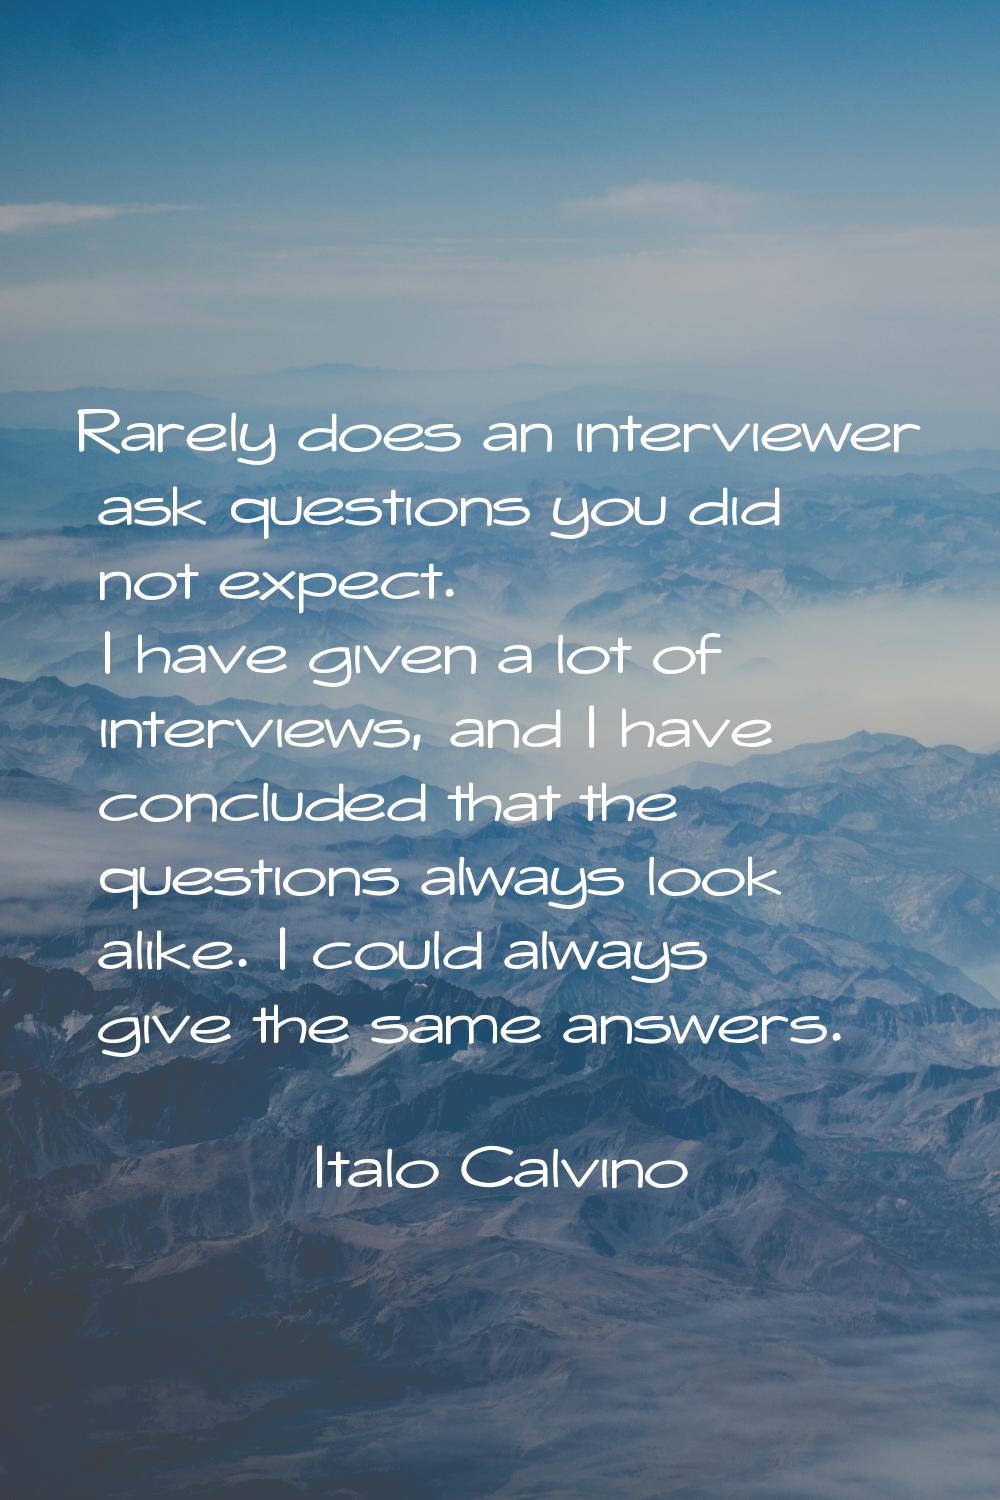 Rarely does an interviewer ask questions you did not expect. I have given a lot of interviews, and 